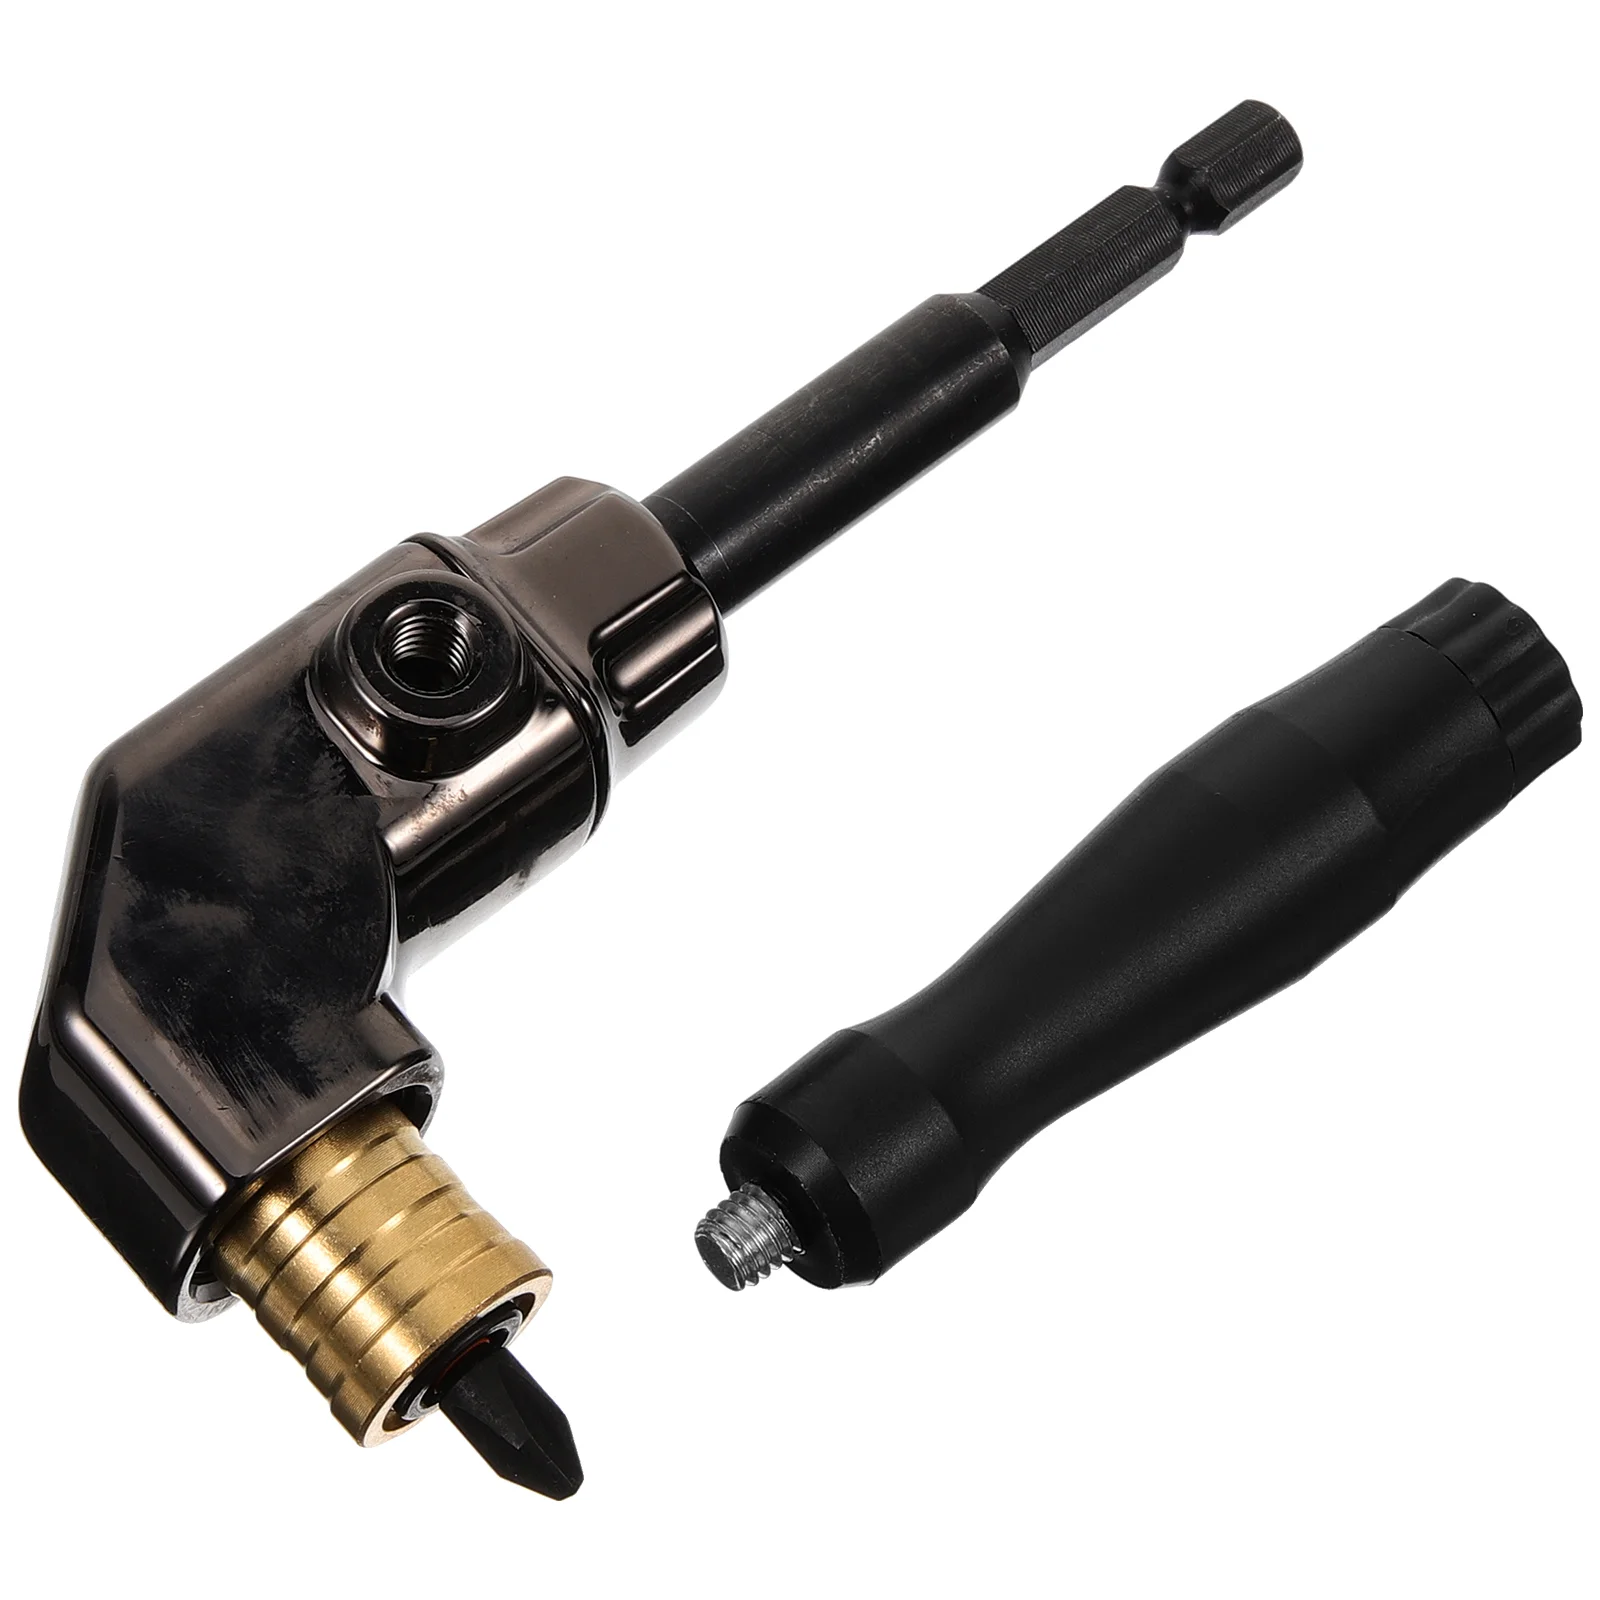 

Impact Wrench Adapter Screwdriver Corner Outlet Drill Accessories and Attachments